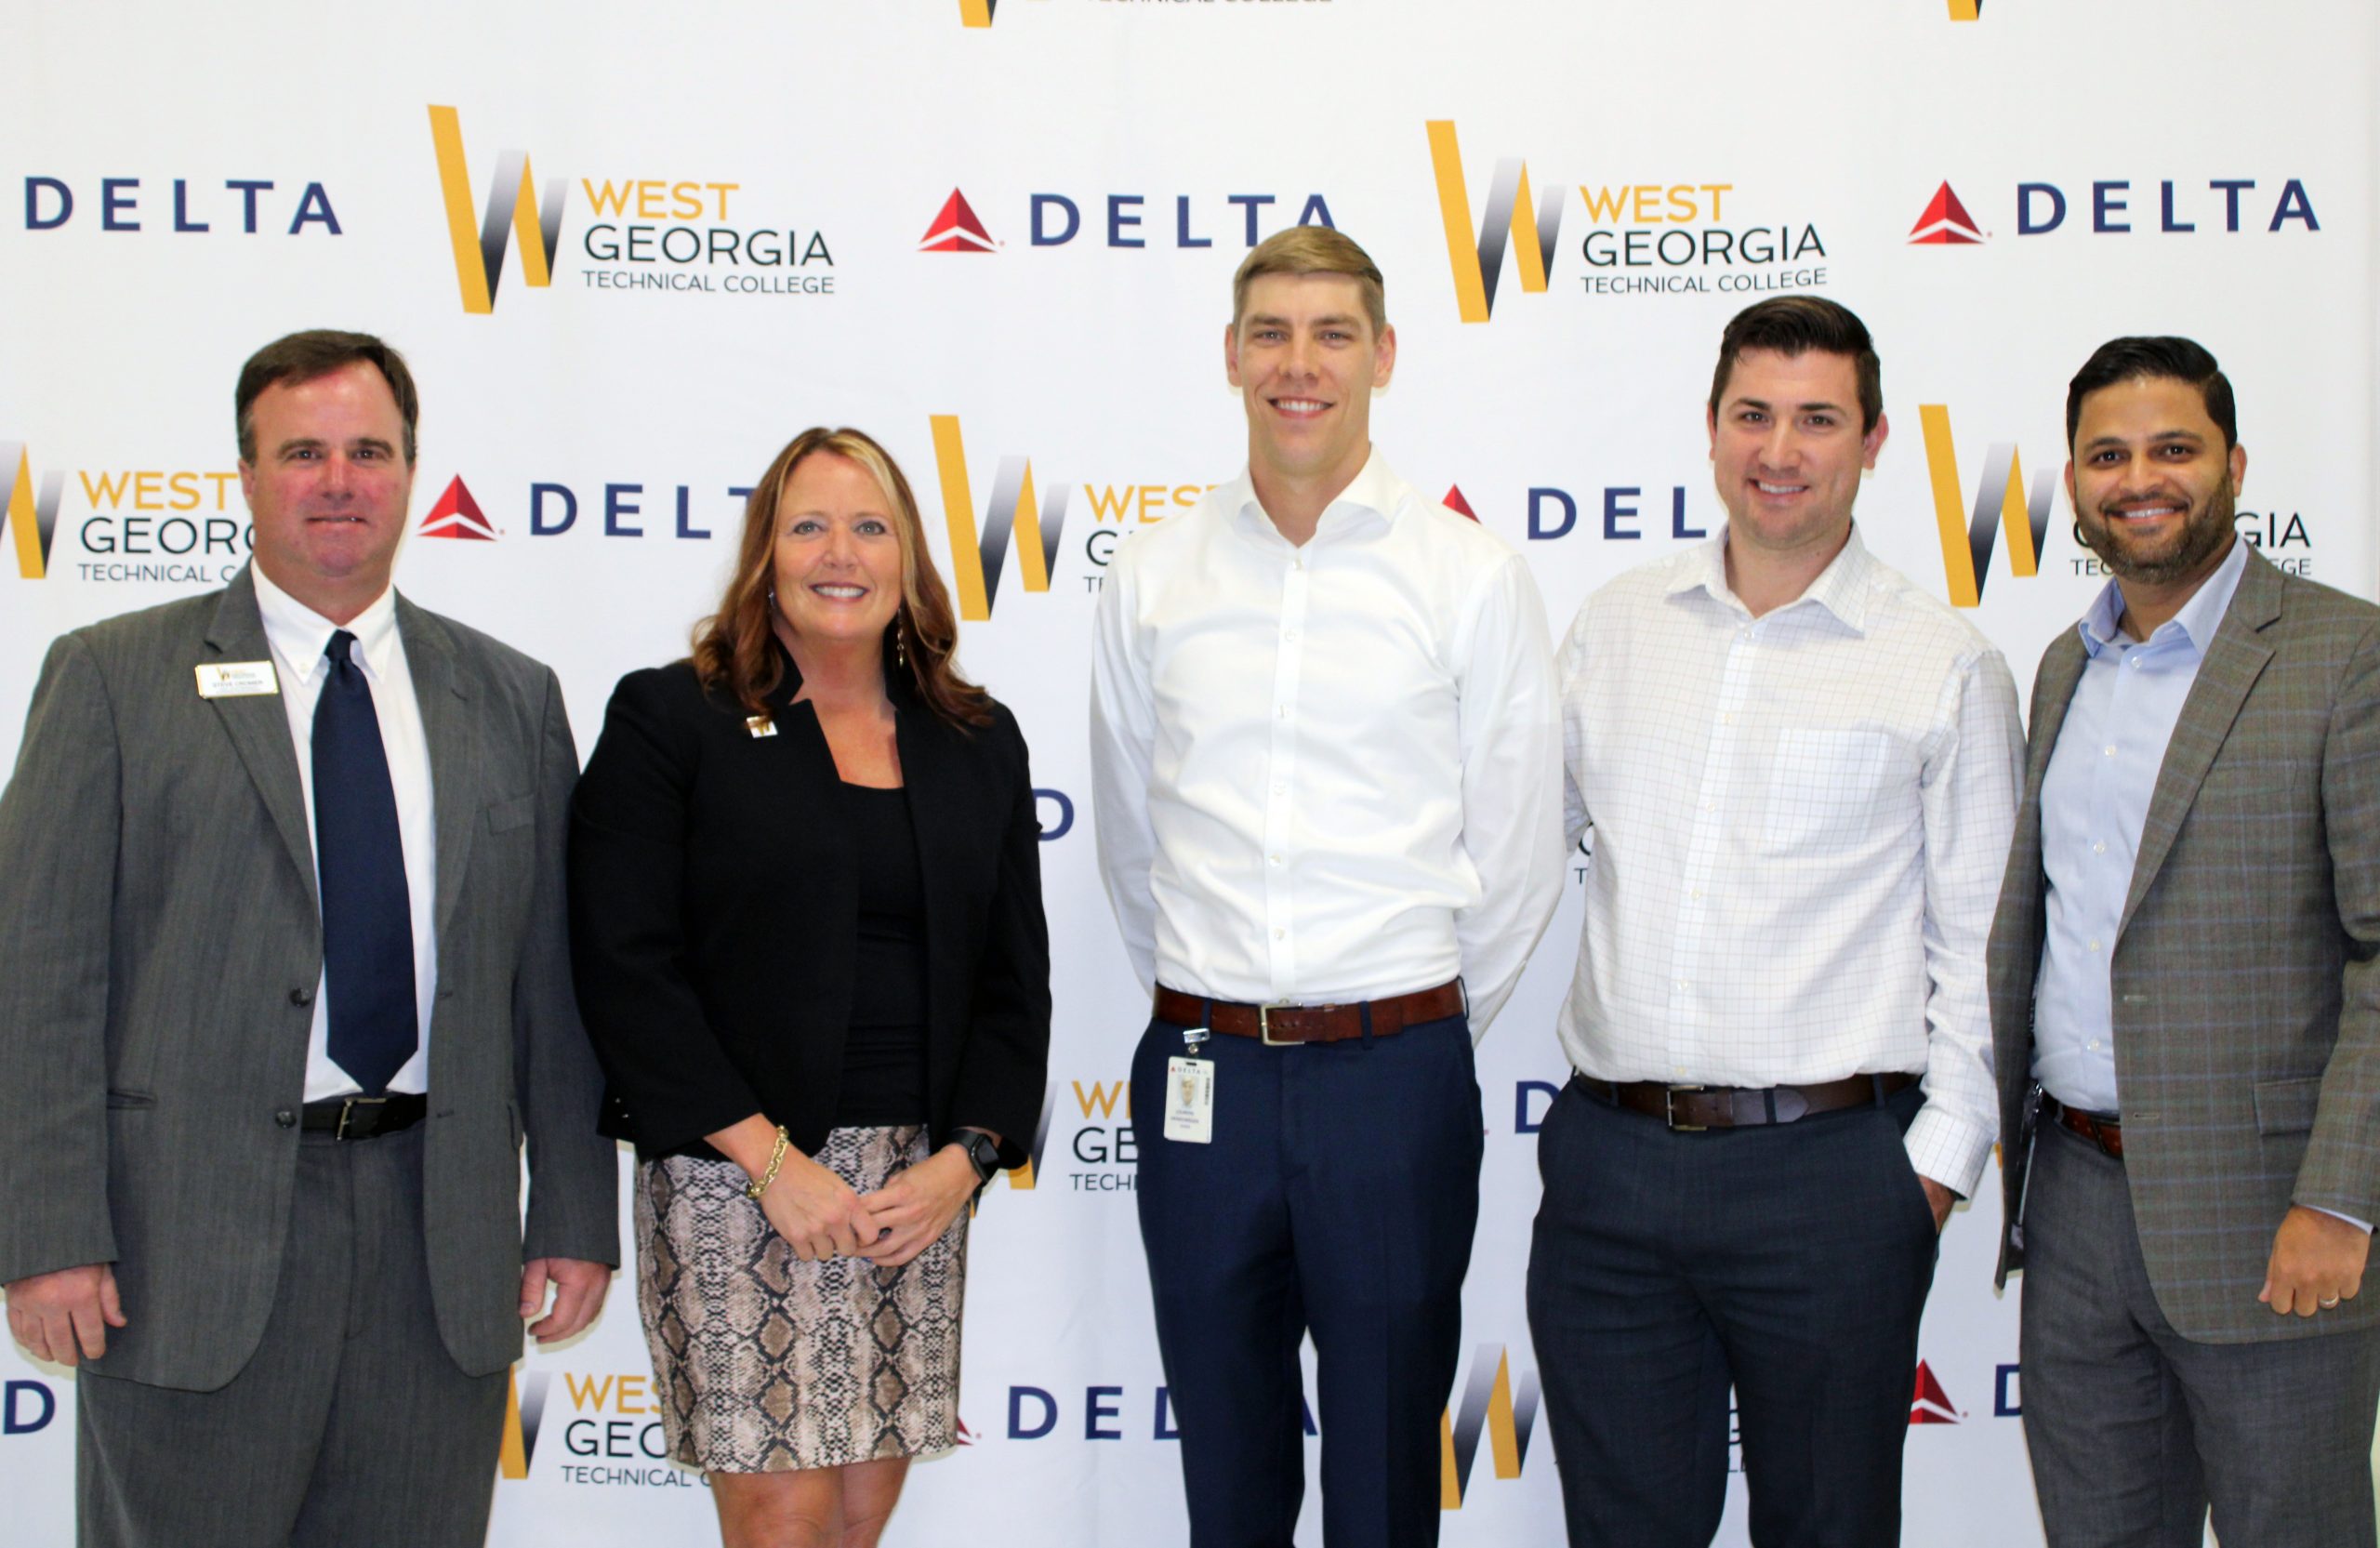 WGTC and Delta employees standing